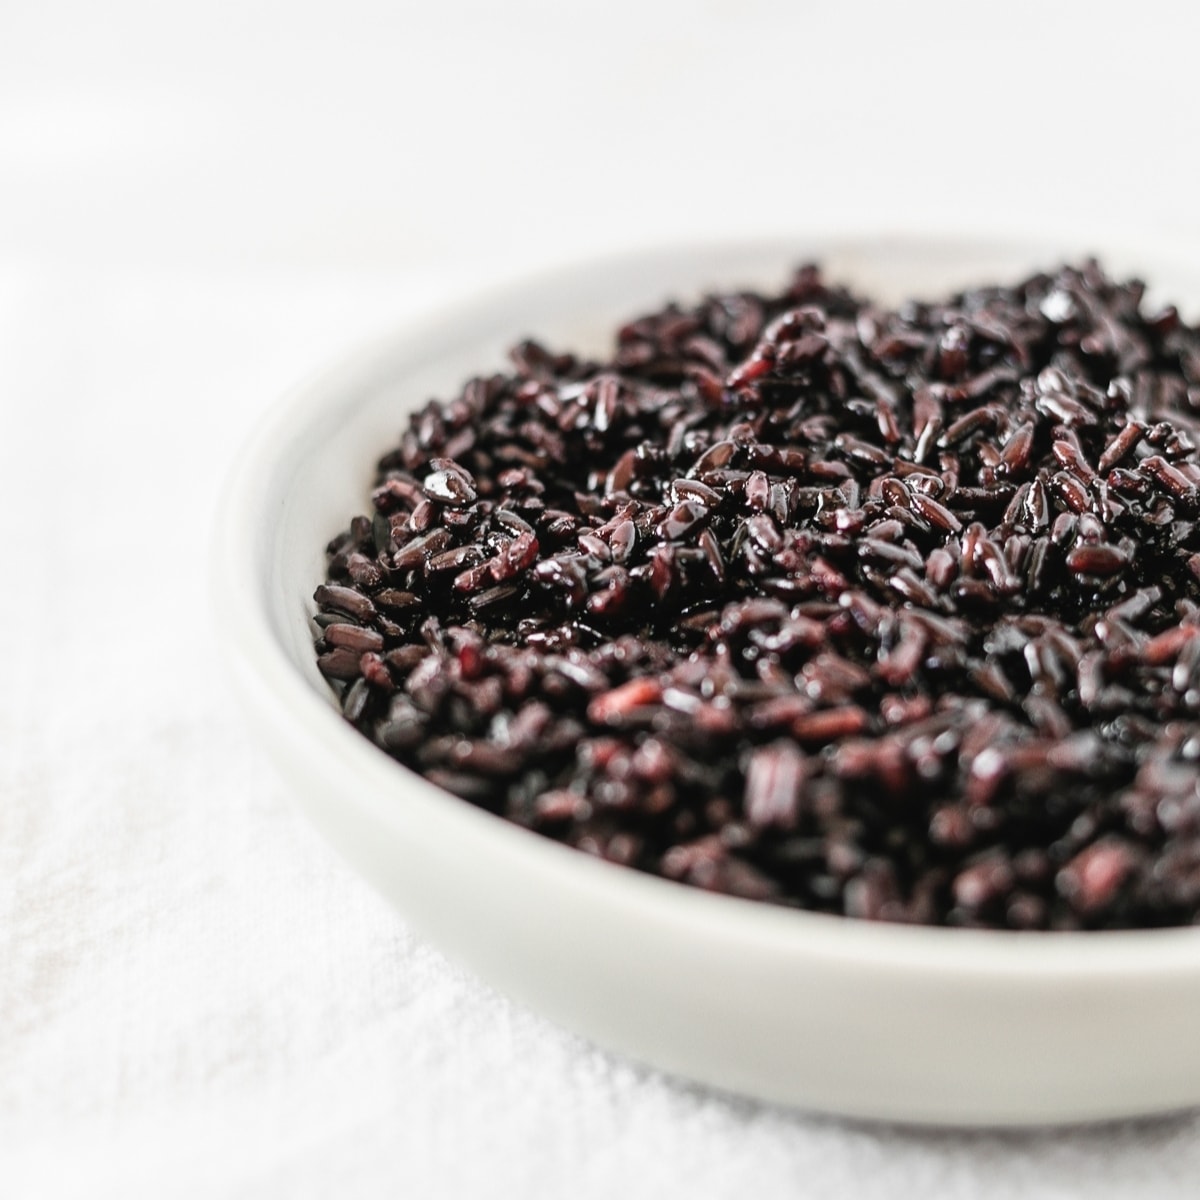 How To Cook Purple Rice In Rice Cooker 